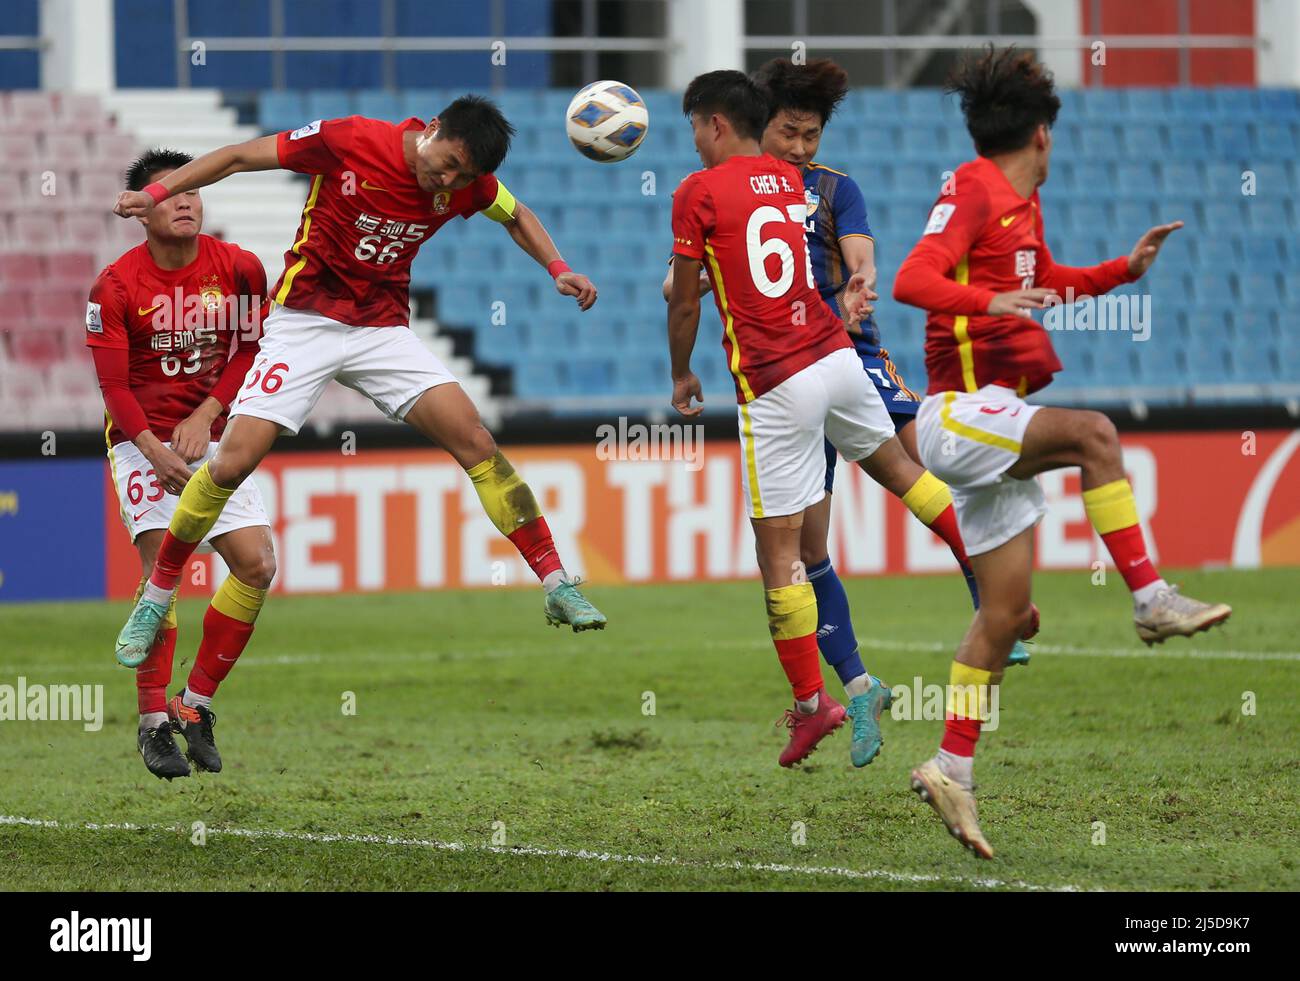 Johor Baru, Malaysia. 21st Apr, 2022. Yang Xin (L) and Chen Run (R3) of Guangzhou Evergrande are seen in action during the AFC Champions League Group I match between Guangzhou Evergrande and Ulsan Hyundai at the Tan Sri Dato Hj Hassan Yunos Stadium. (Final score: Guangzhou Evergrande 0:3 Ulsan Hyundai) (Photo by © Wong Fok Loy/SOPA Images/Sipa USA) Credit: Sipa USA/Alamy Live News Stock Photo